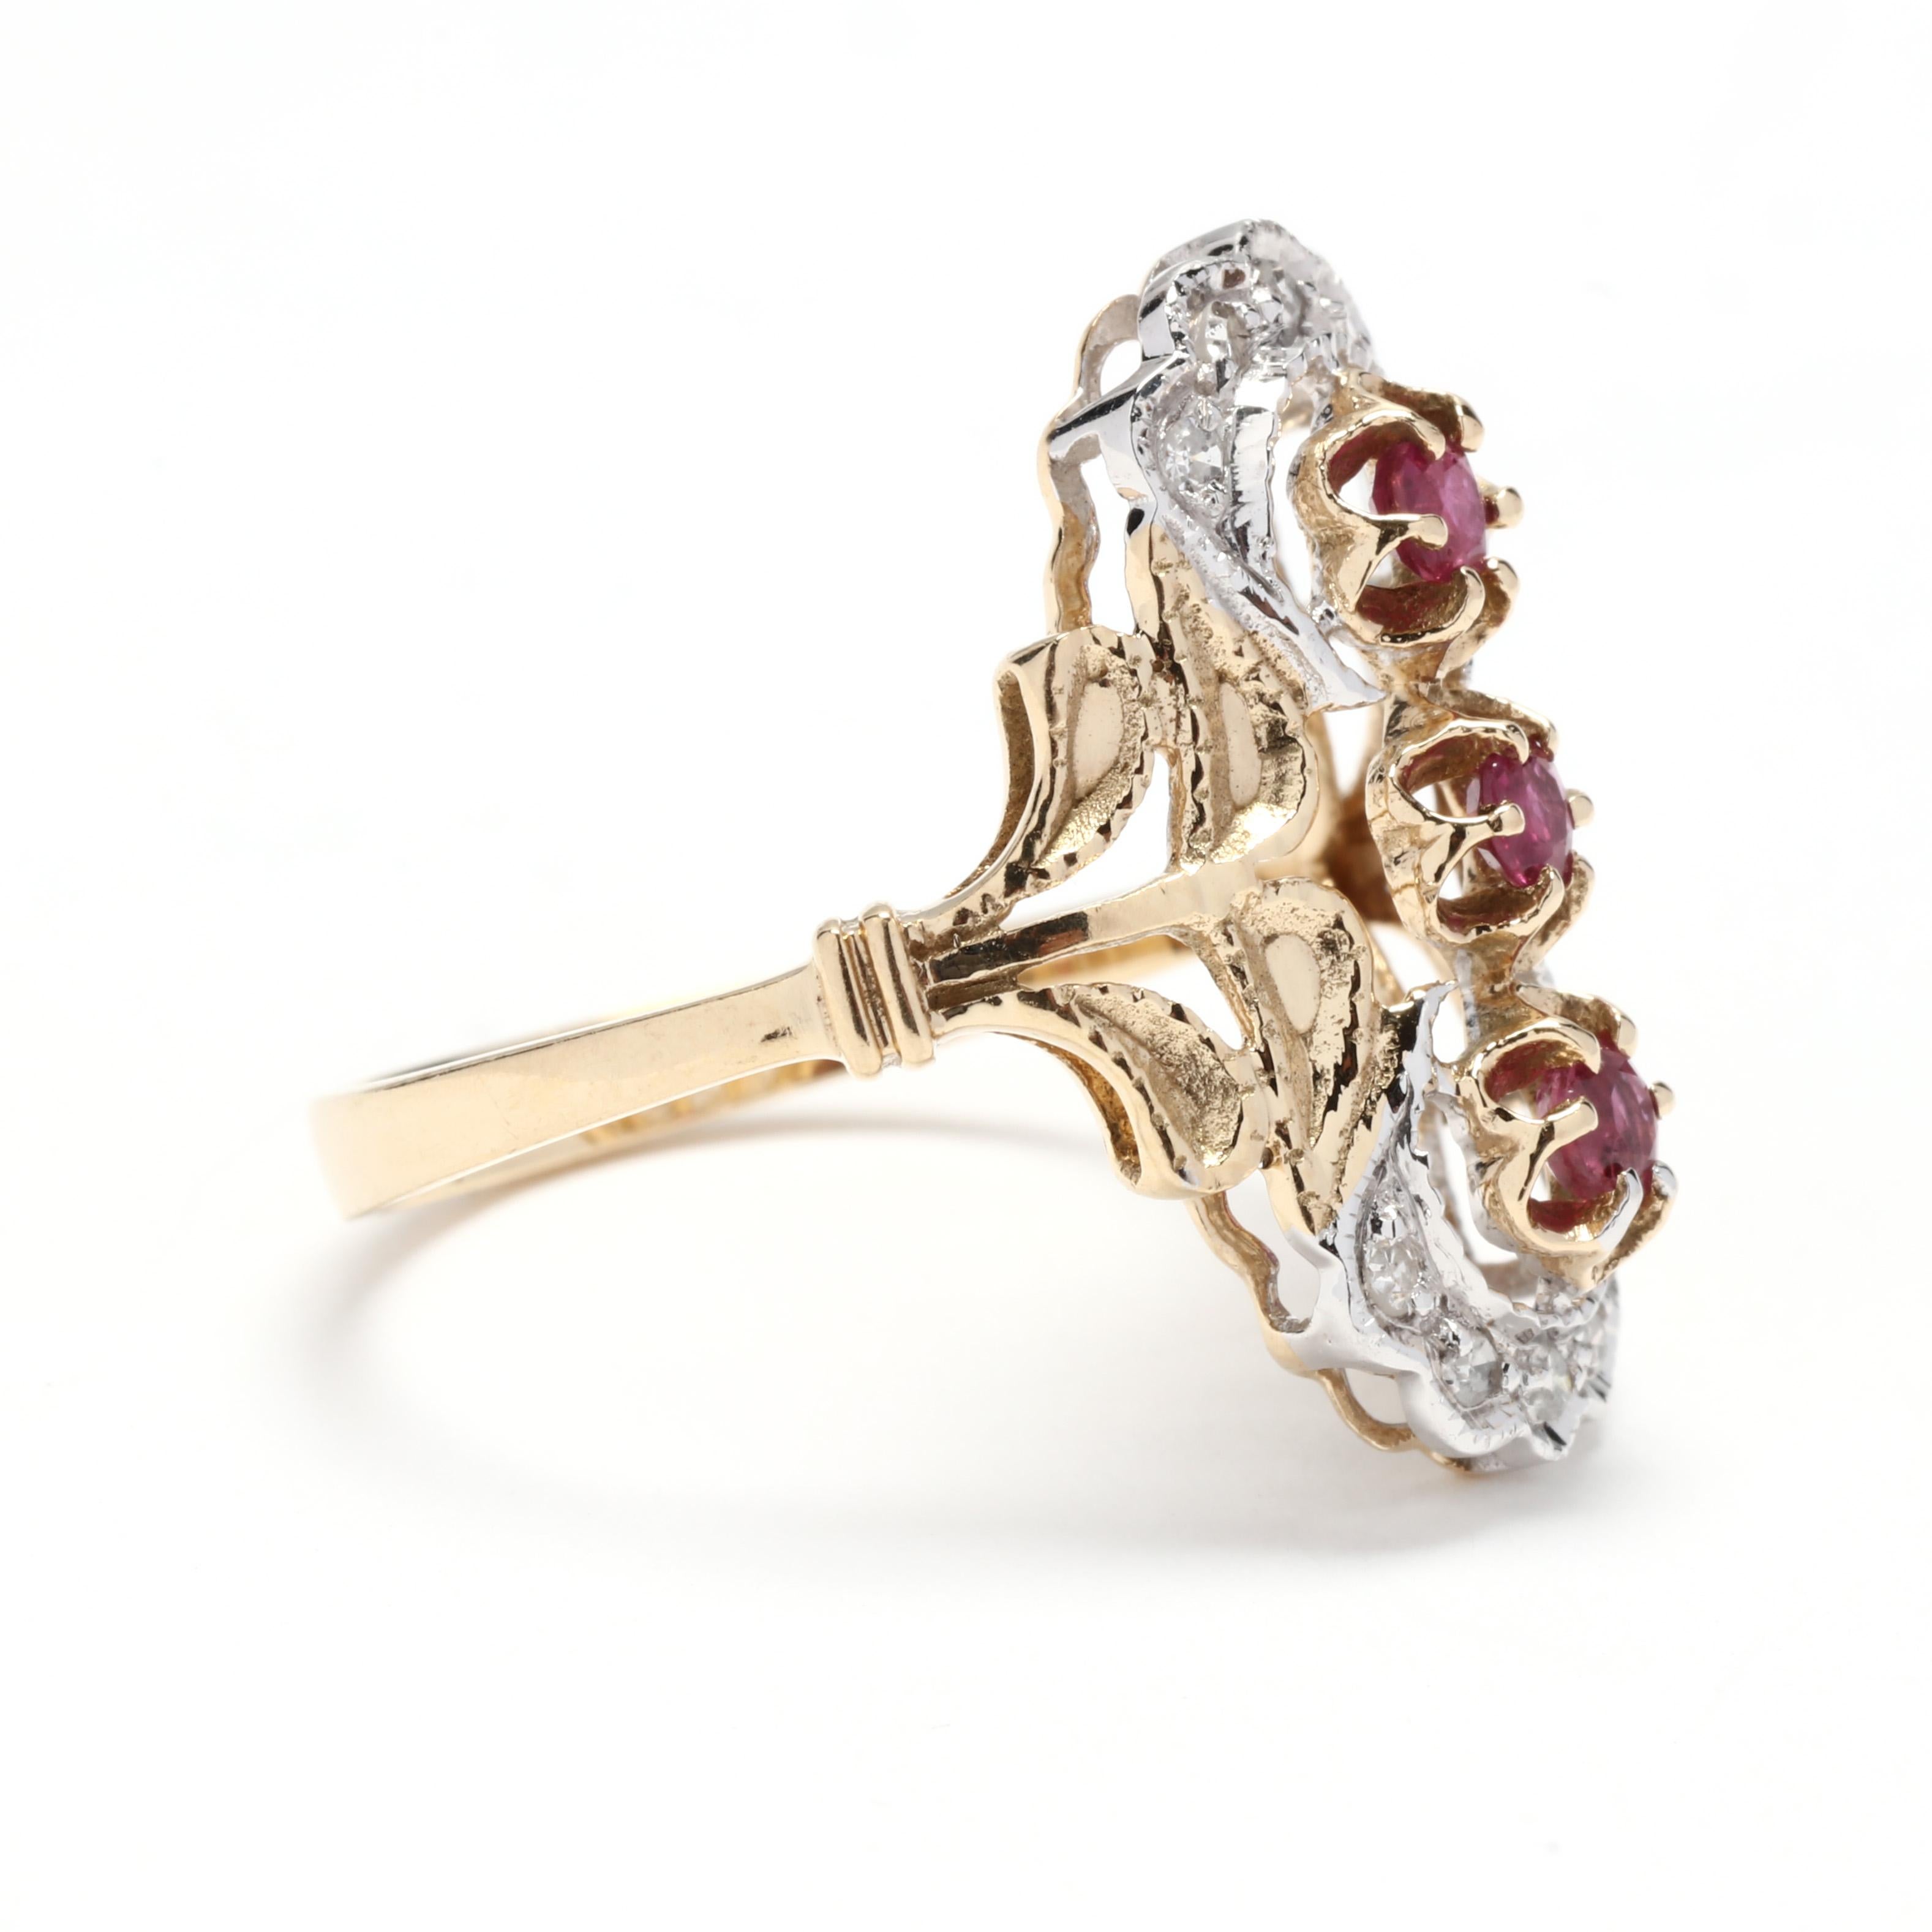 A vintage 14 karat bi color gold ruby and diamond navette statement ring. This long dinner ring features three vertical, prong set round cut rubies weighing approximately .30 total carats with a diamond set scalloped edging weighing approximately